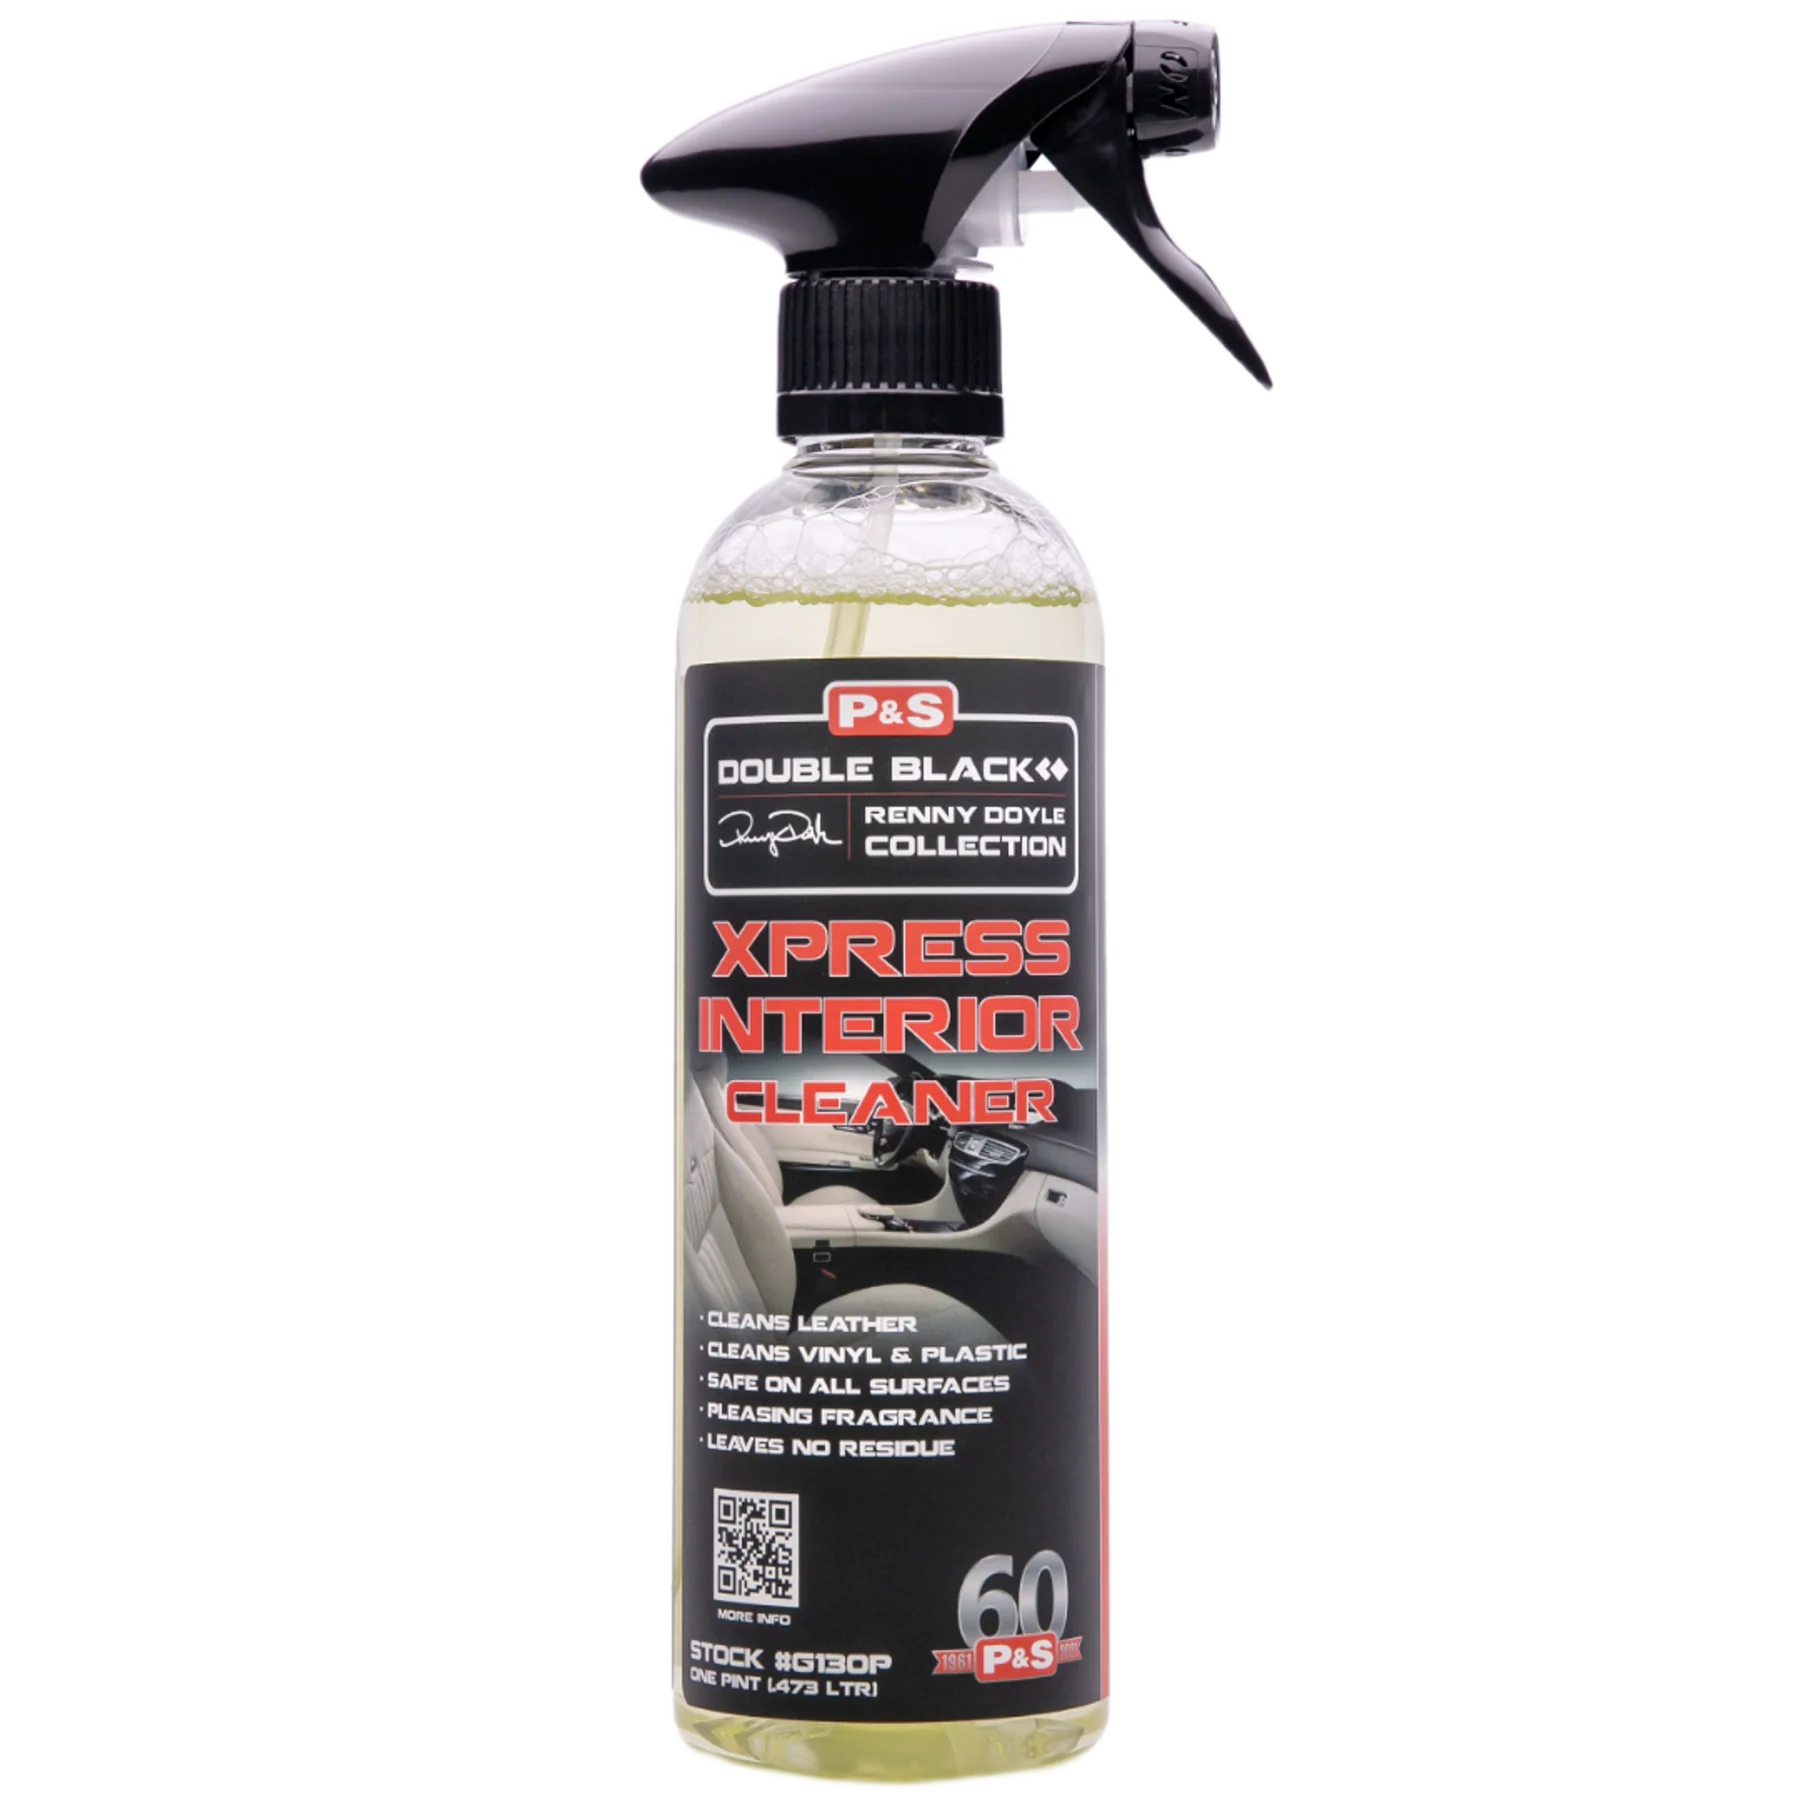 P&S Detail Products Xpress Interior Cleaner – VIPCARTEL Automotive